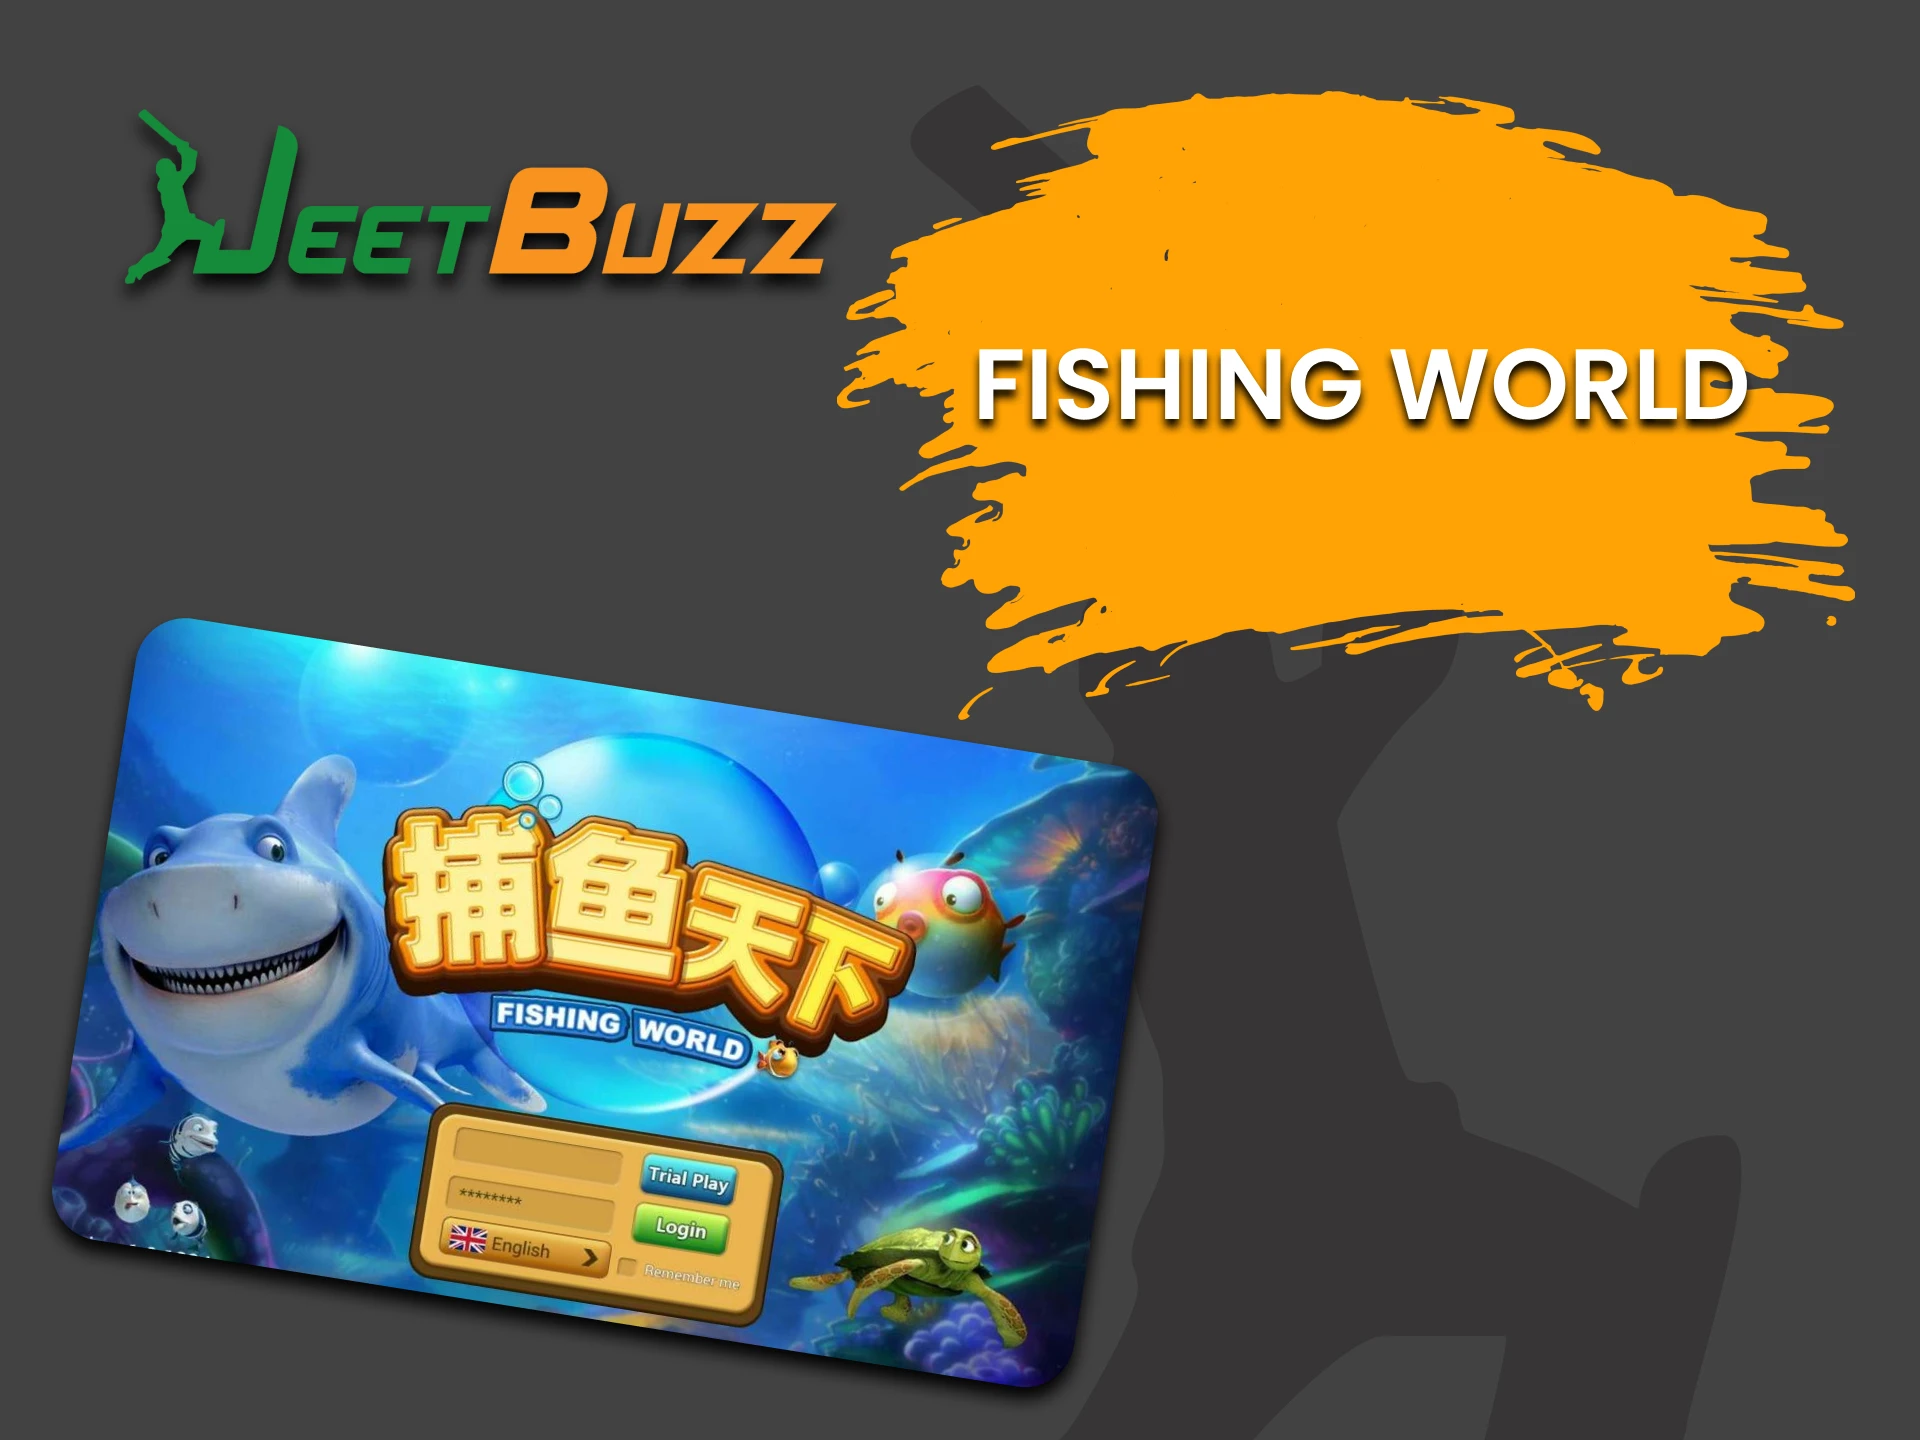 Try your hand at Fishing World on JeetBuzz.